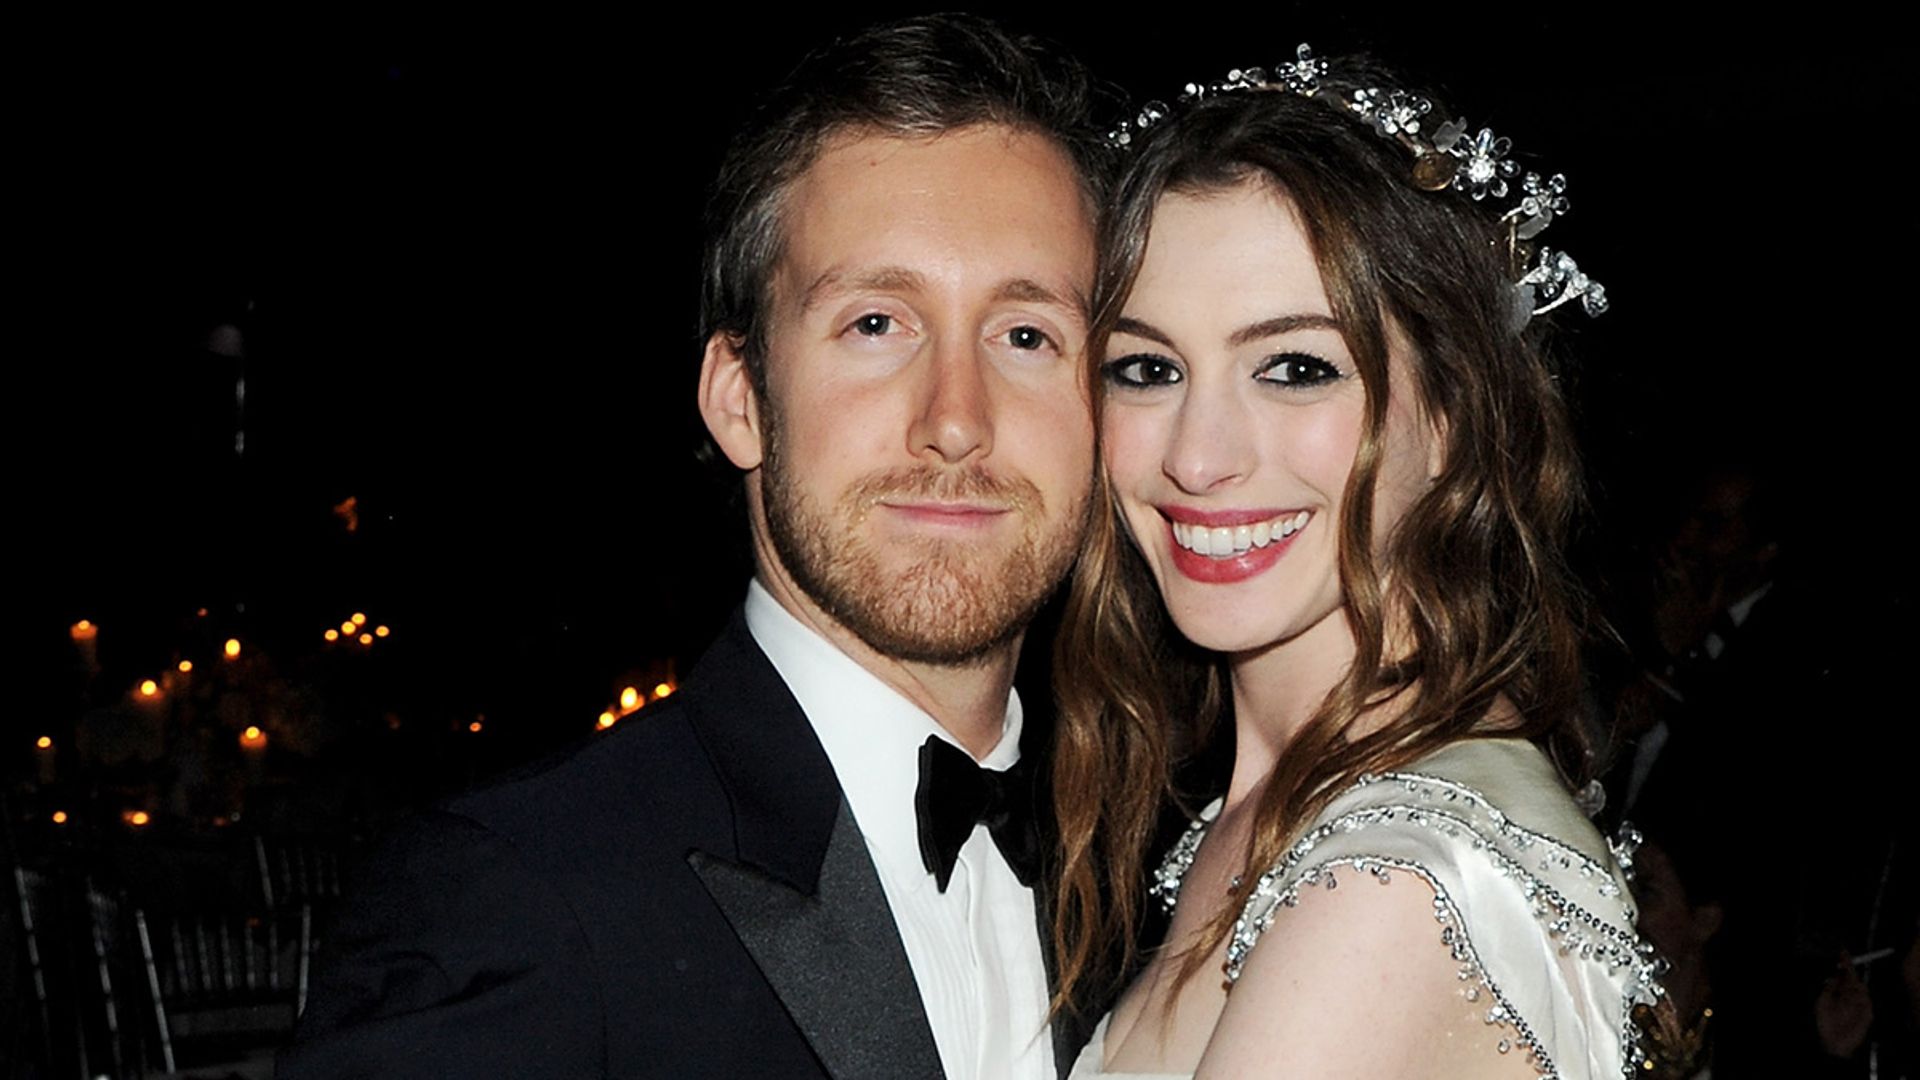 Anne Hathaway delights fans by sharing incredibly rare family photo